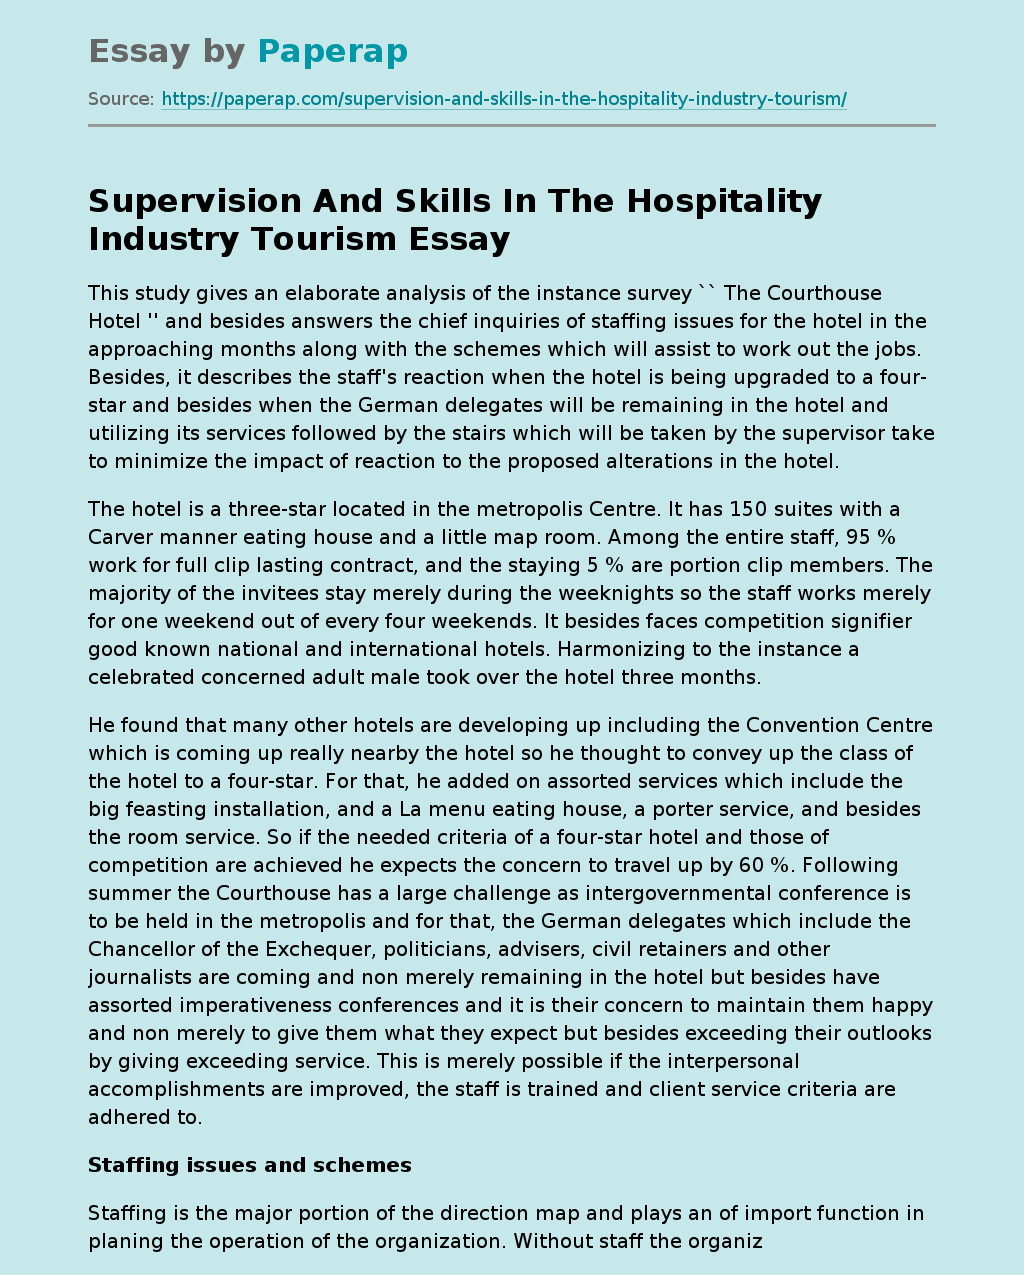 Supervision And Skills In The Hospitality Industry Tourism